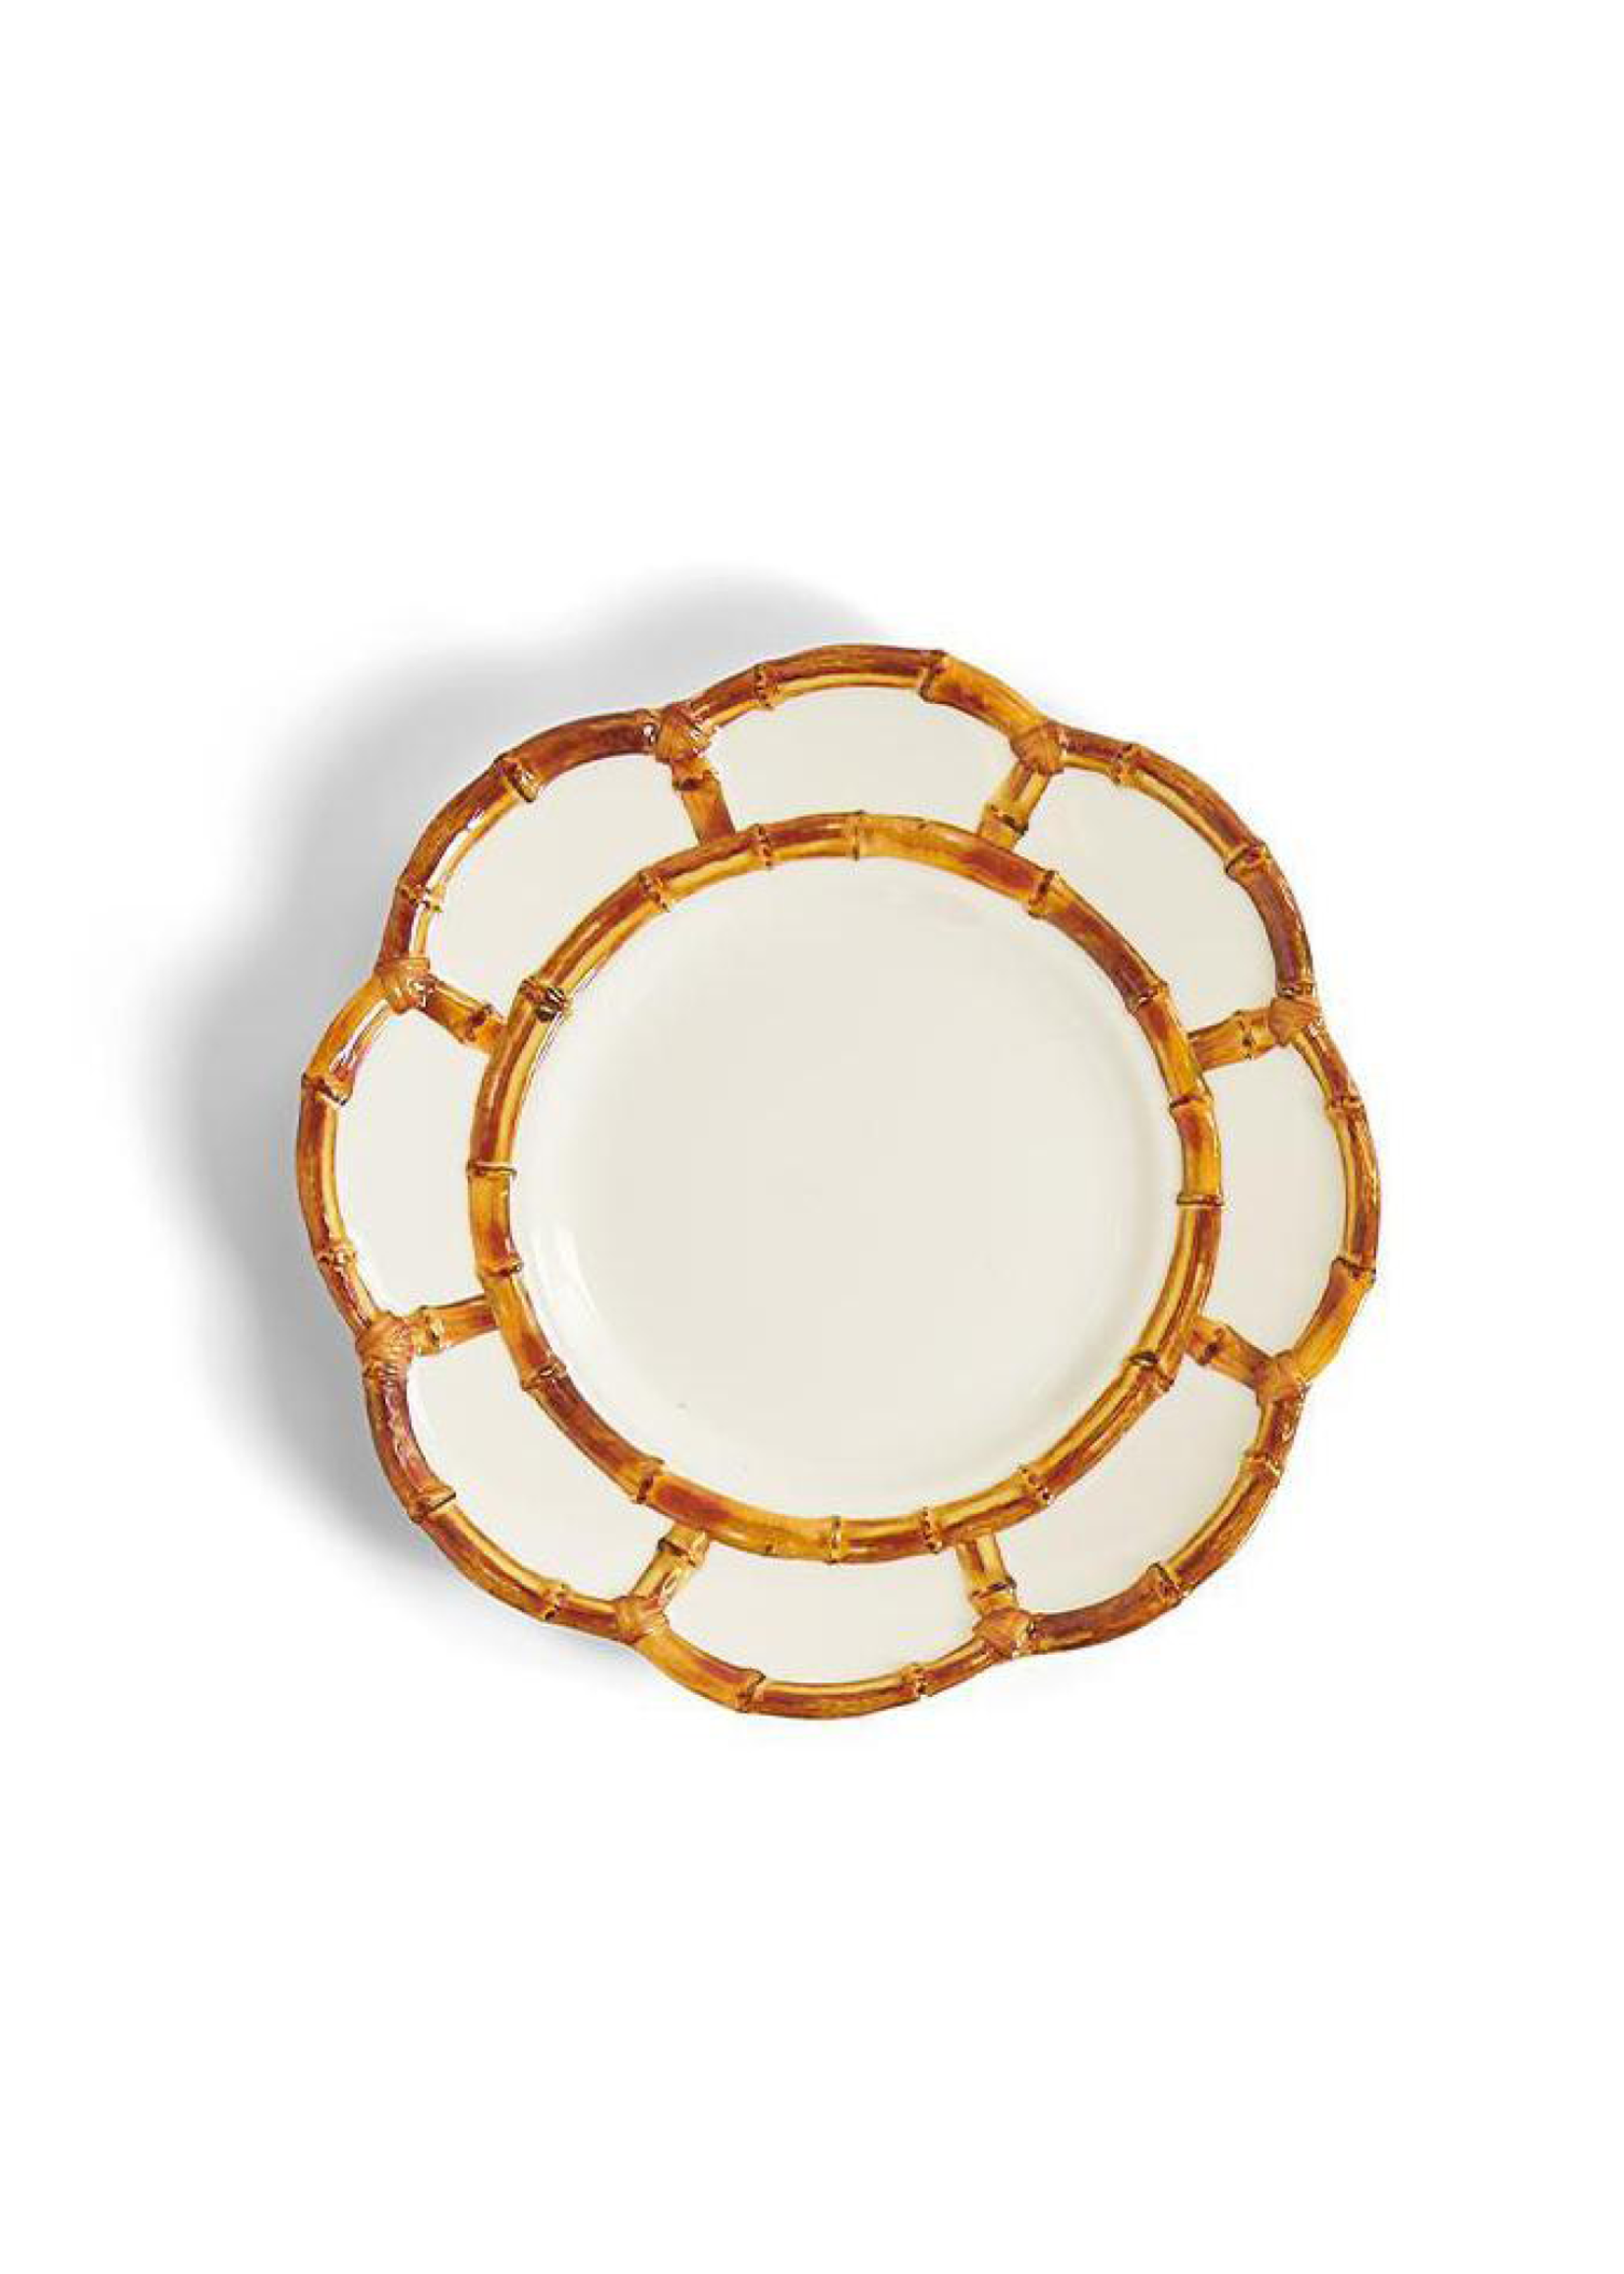 Two's Company, Inc. Bamboo Touch Accent Plate